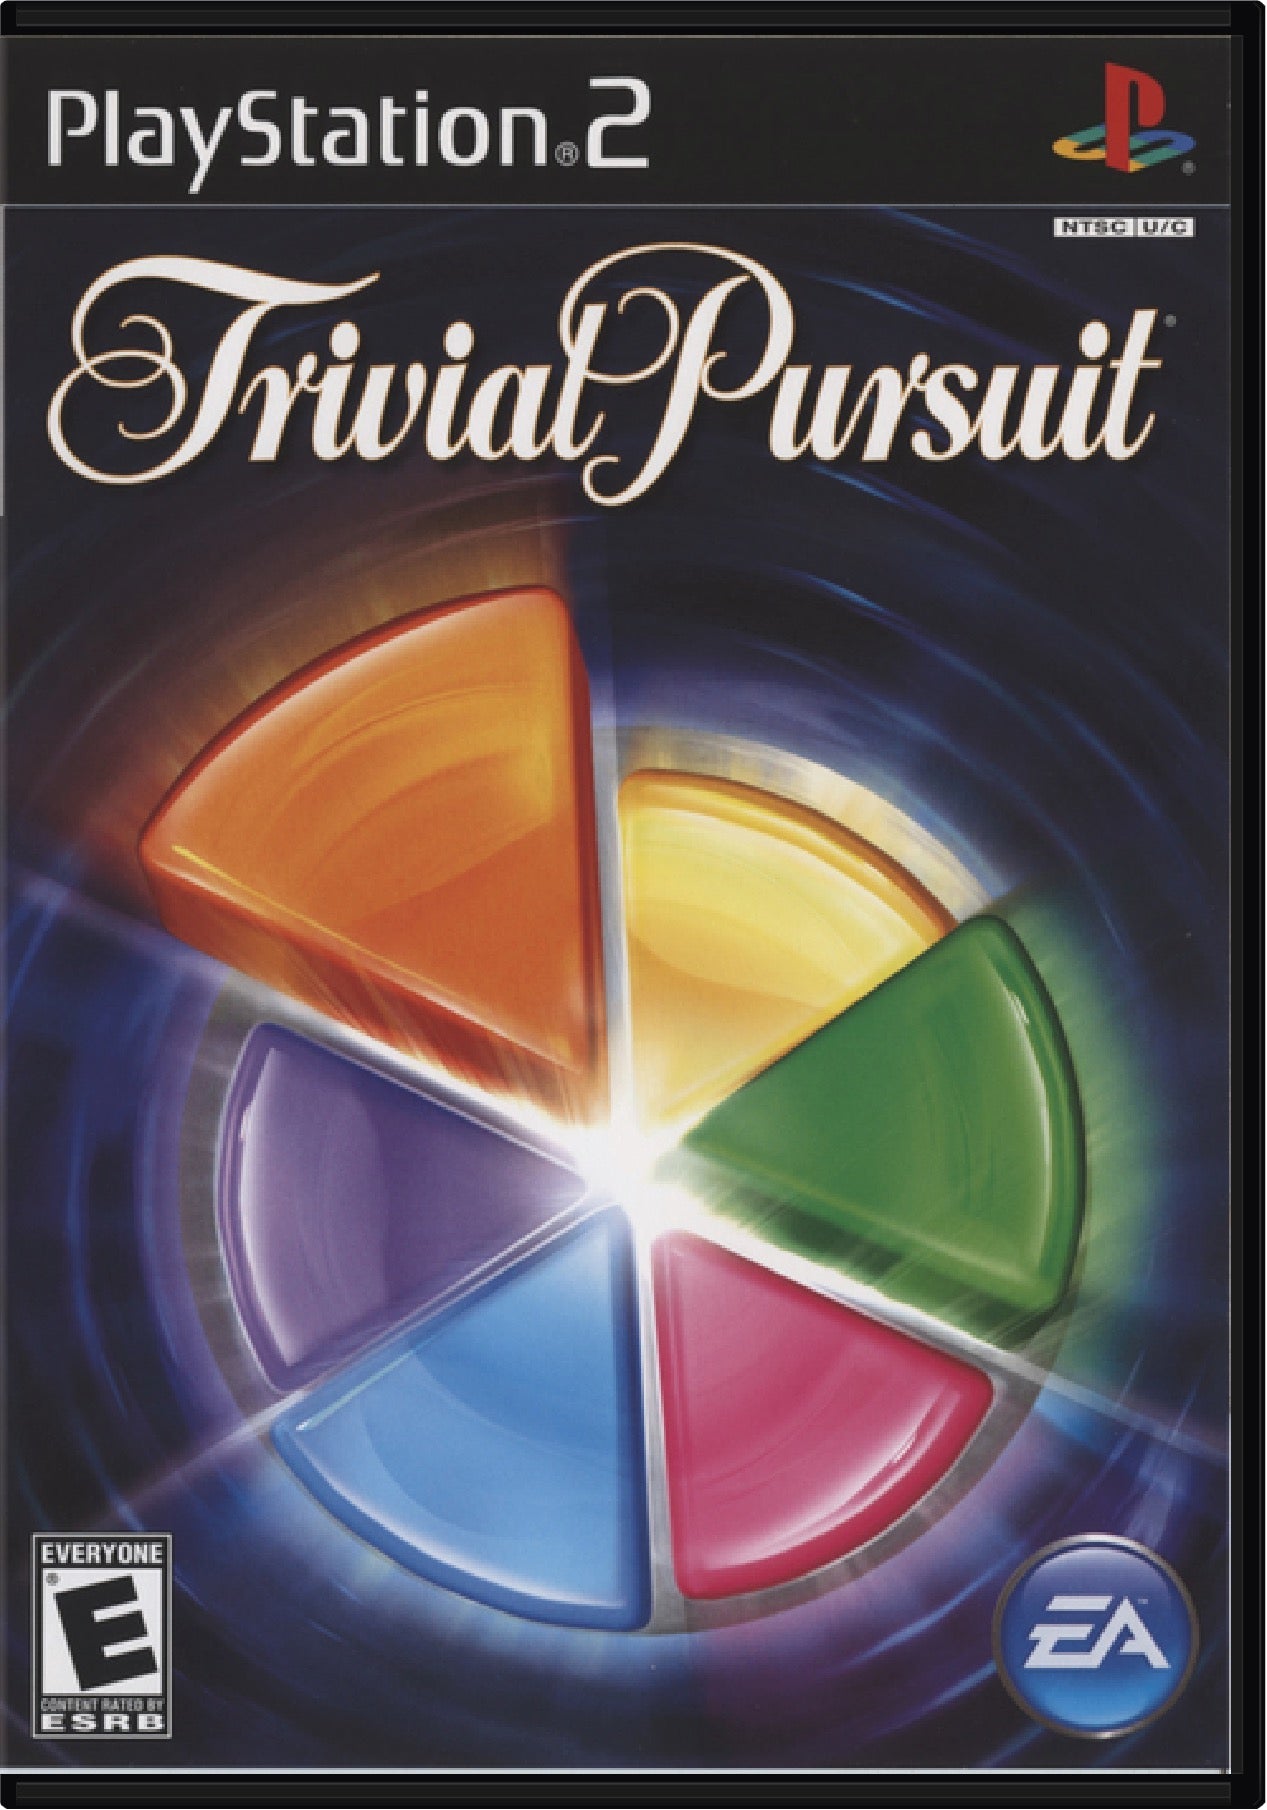 Trivial Pursuit Cover Art and Product Photo